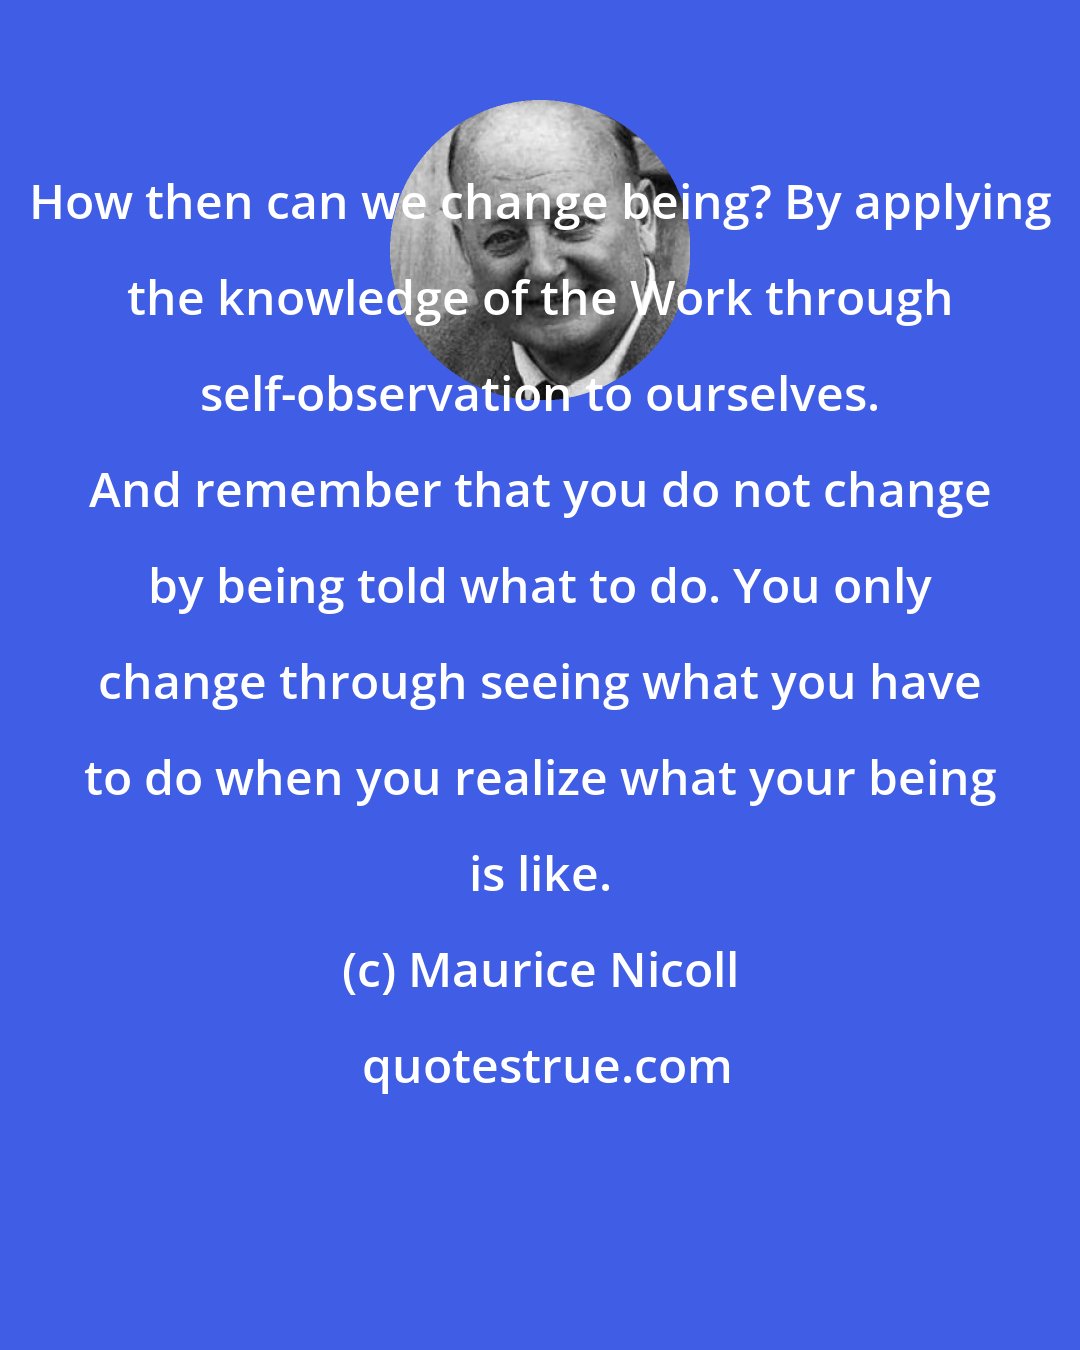 Maurice Nicoll: How then can we change being? By applying the knowledge of the Work through self-observation to ourselves. And remember that you do not change by being told what to do. You only change through seeing what you have to do when you realize what your being is like.